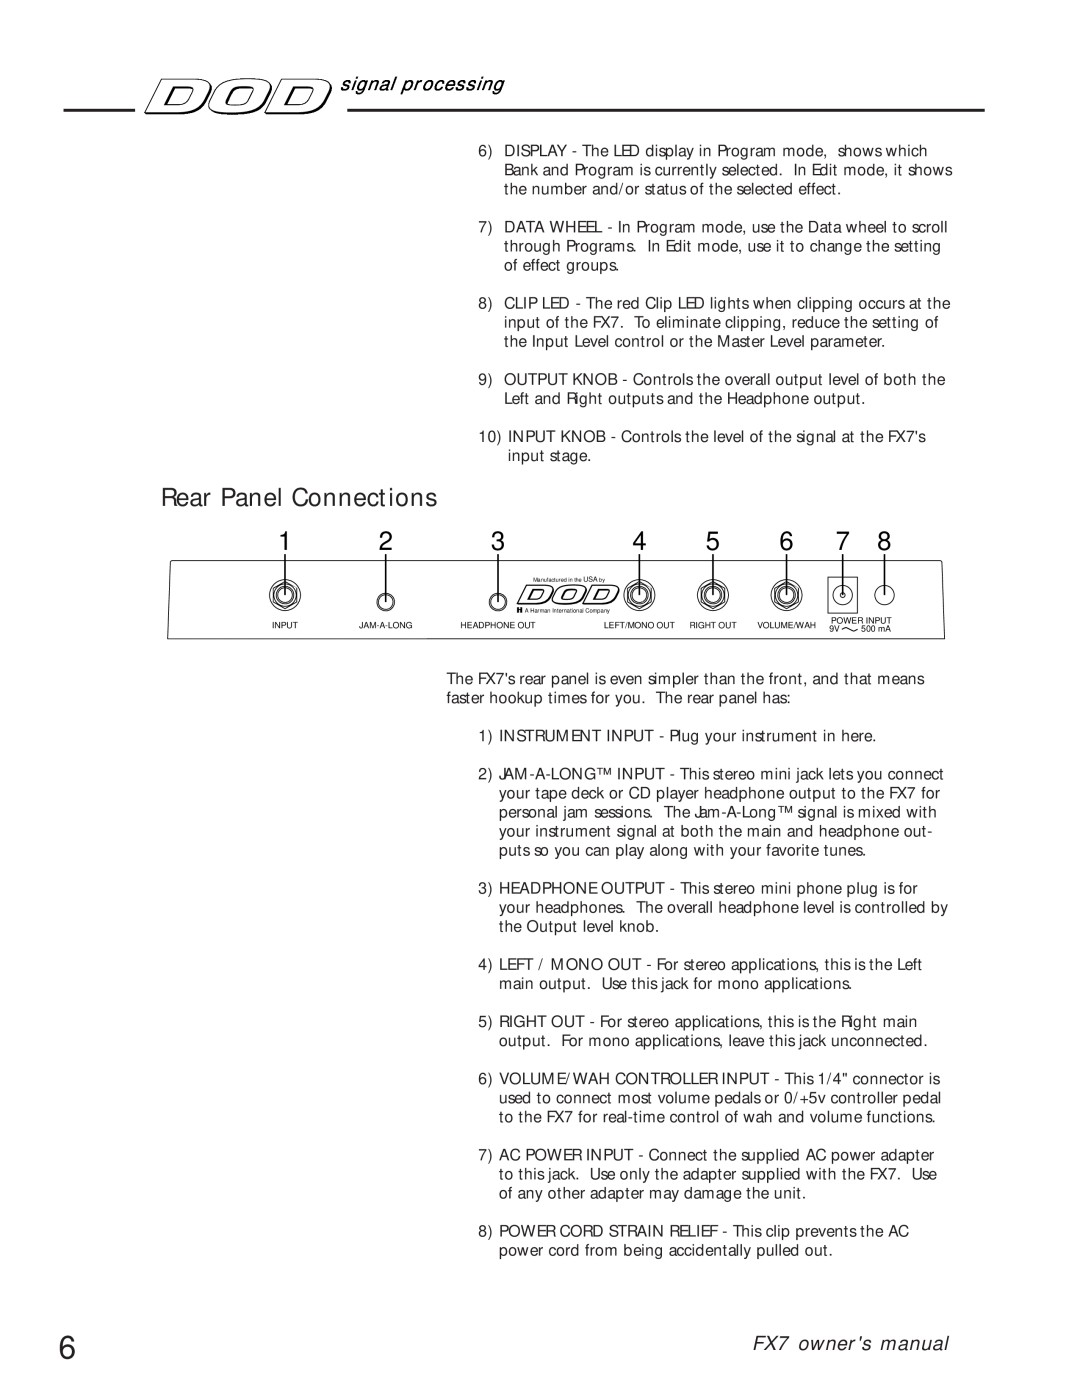 DOD FX7 owner manual Rear Panel Connections, signal processing 